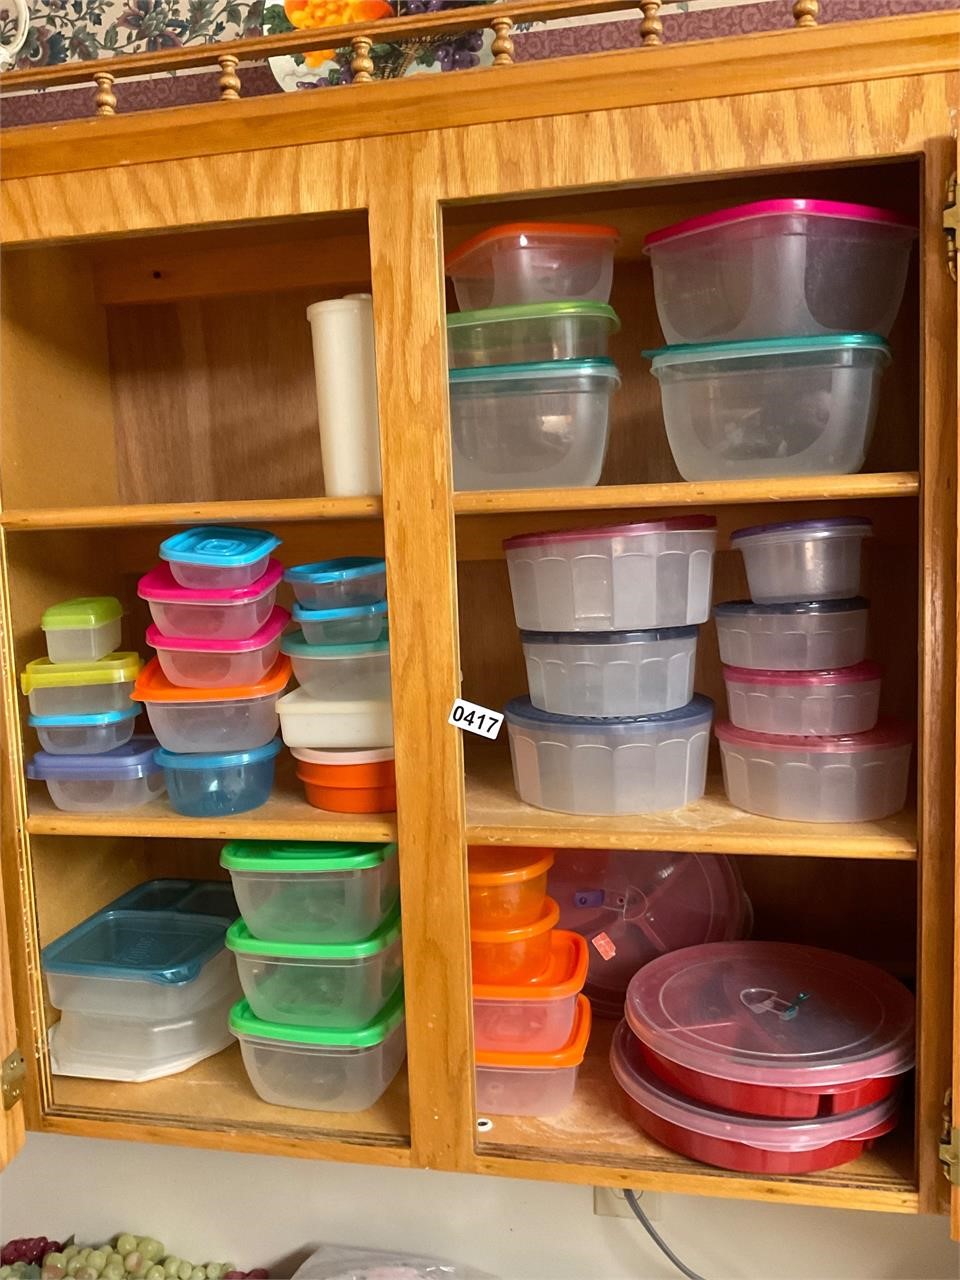 39- assorted plates, bowls, and food containers